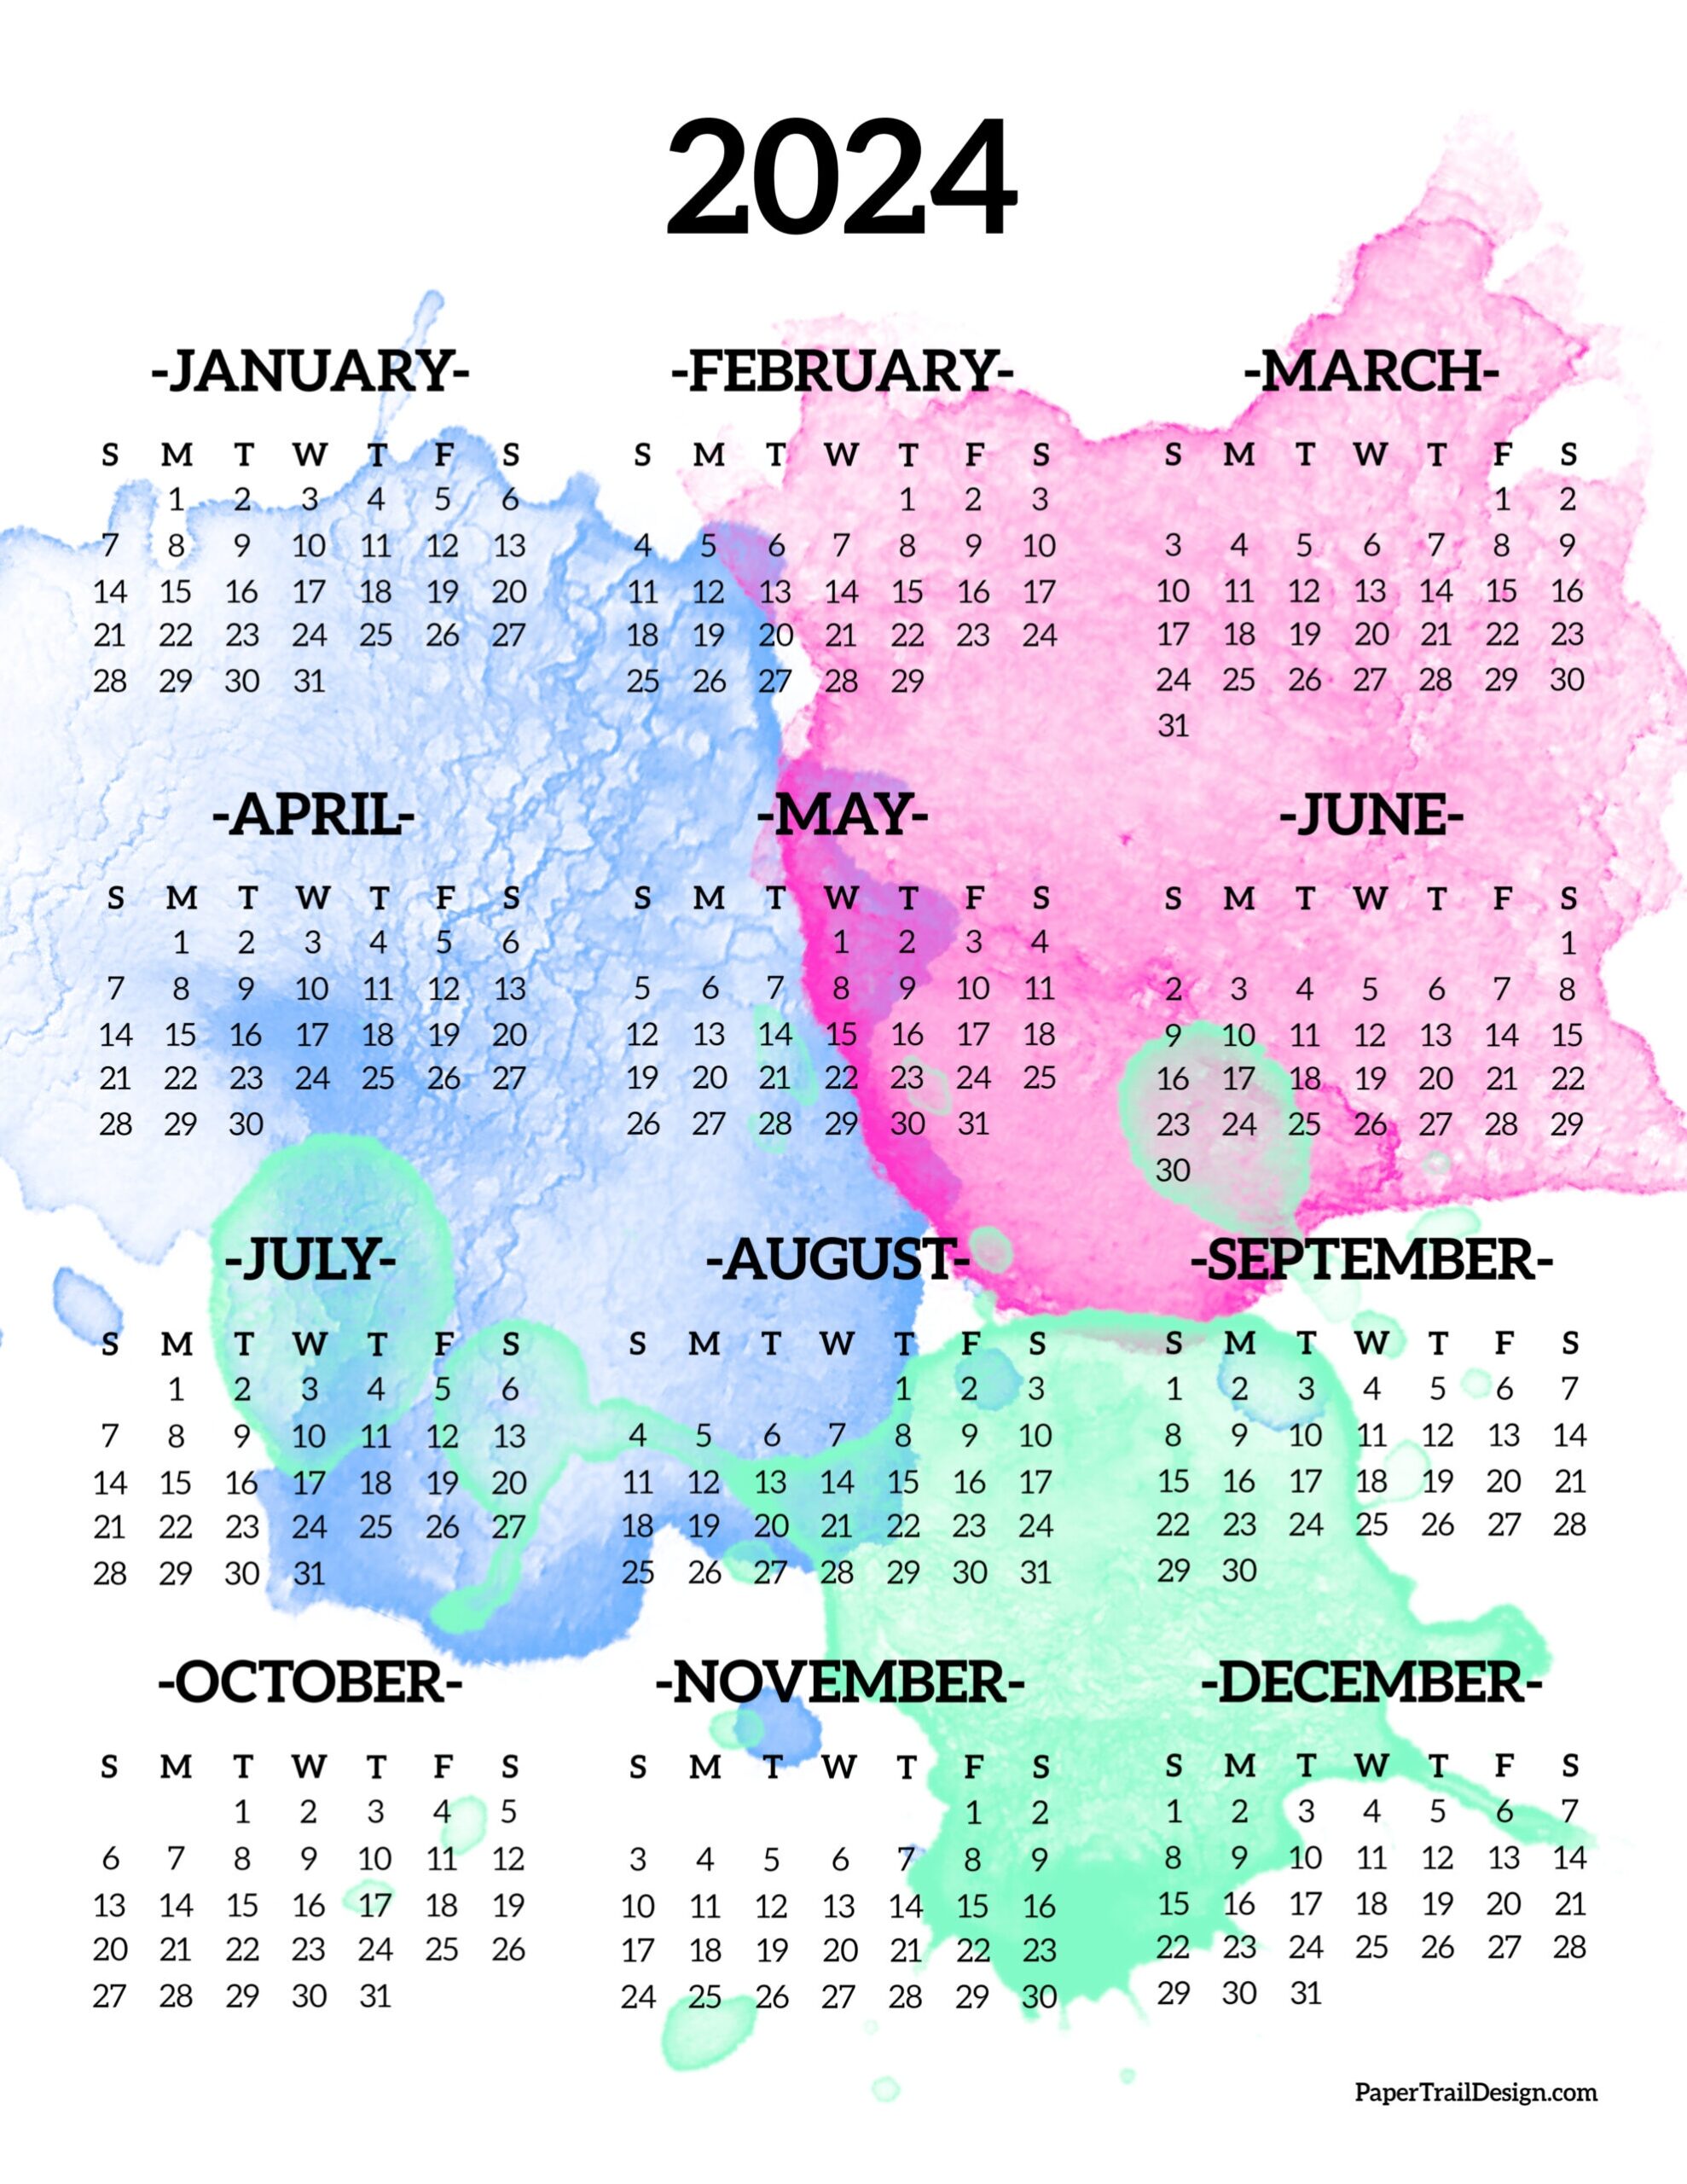 Calendar 2024 Printable One Page - Paper Trail Design intended for Free Printable Calendar 2024 One Page